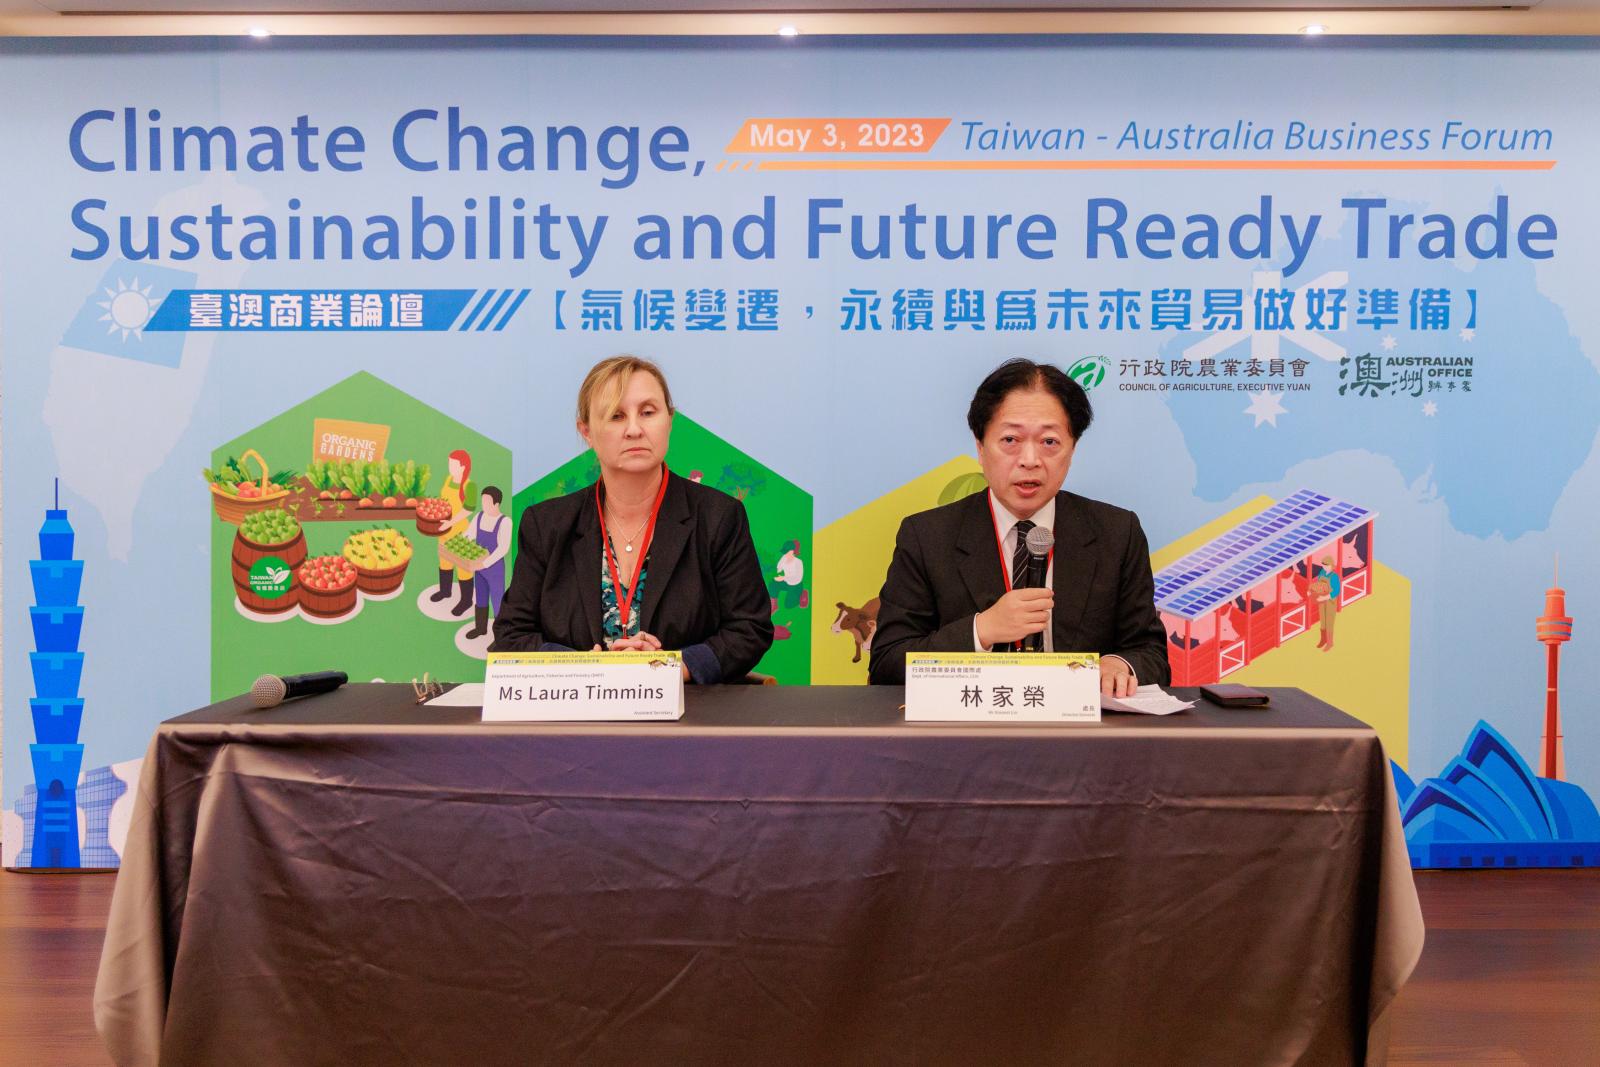 This business forum was co-chaired by Mr. Vincent Lin, Director-General of the Department of International Affairs, COA and Ms. Laura Timmins, Assistant Secretary for Agricultural Trade and Market Access in the Australian Department of Agriculture, Fisheries, and Forestry.